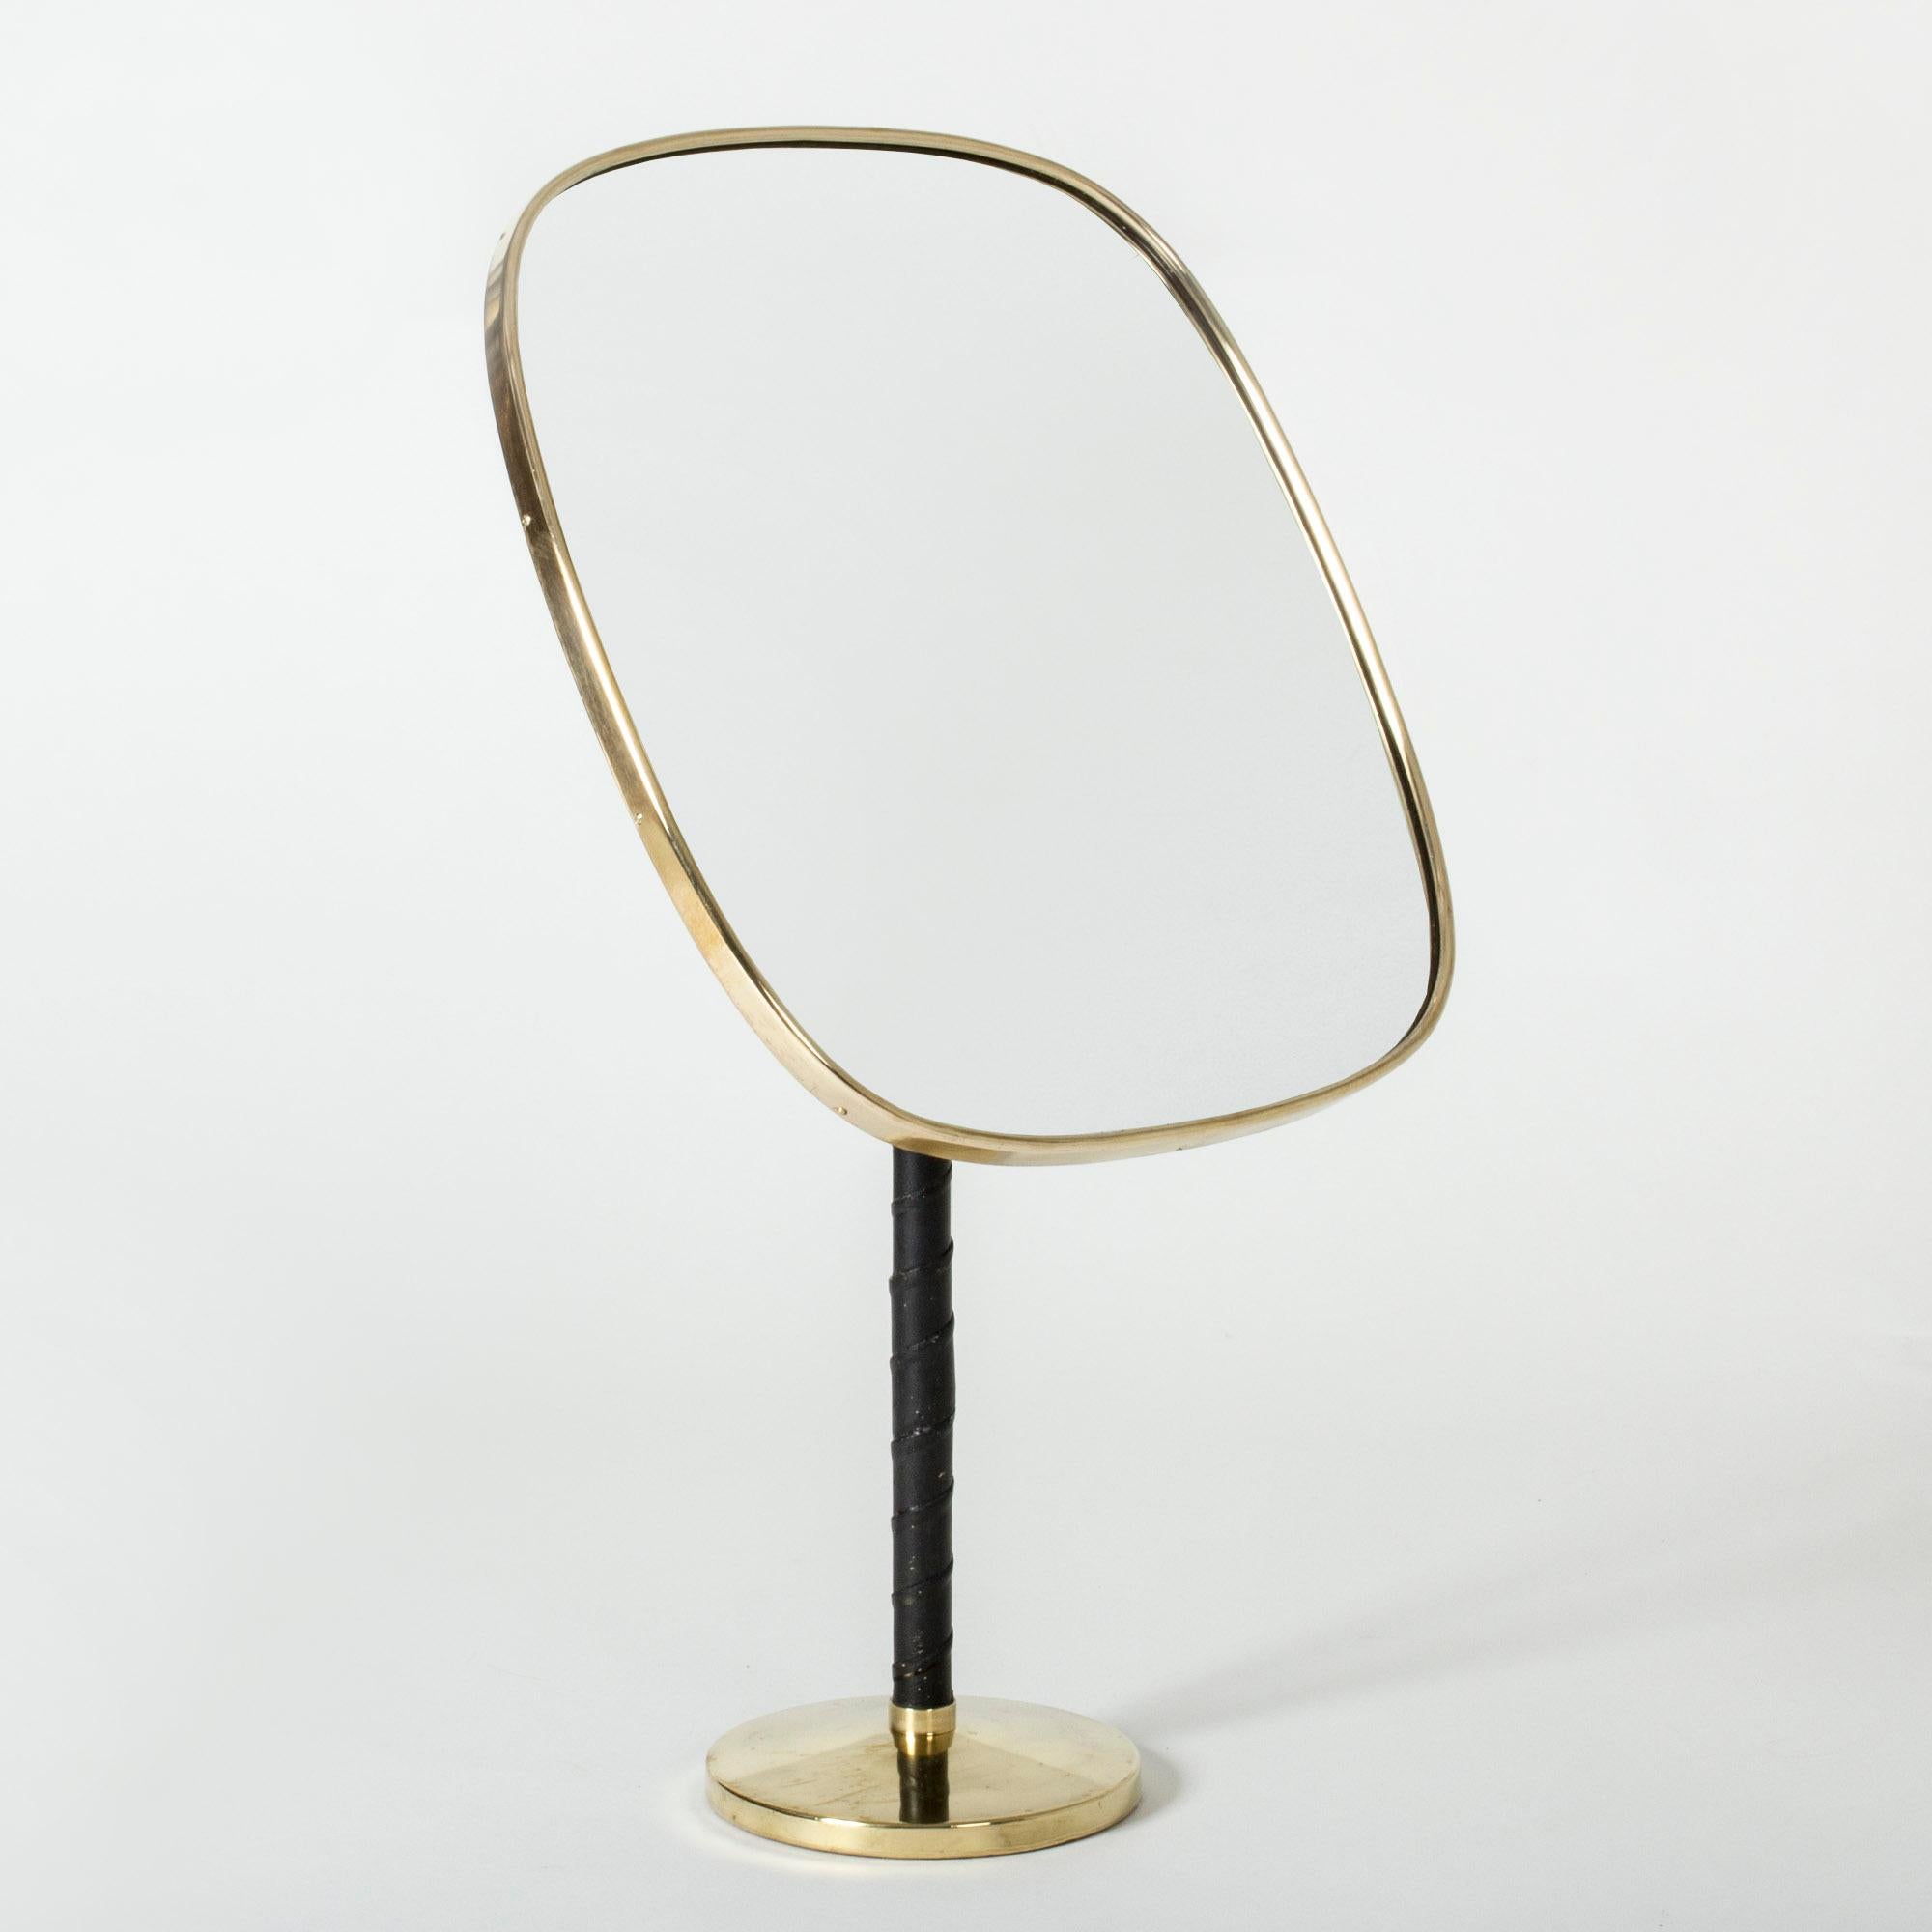 Elegant table mirror by David Rosén, part of the “Futura” series from NK. Large rectangular mirror with rounded corners and handle wound with black leather. Adjustable height and angle.